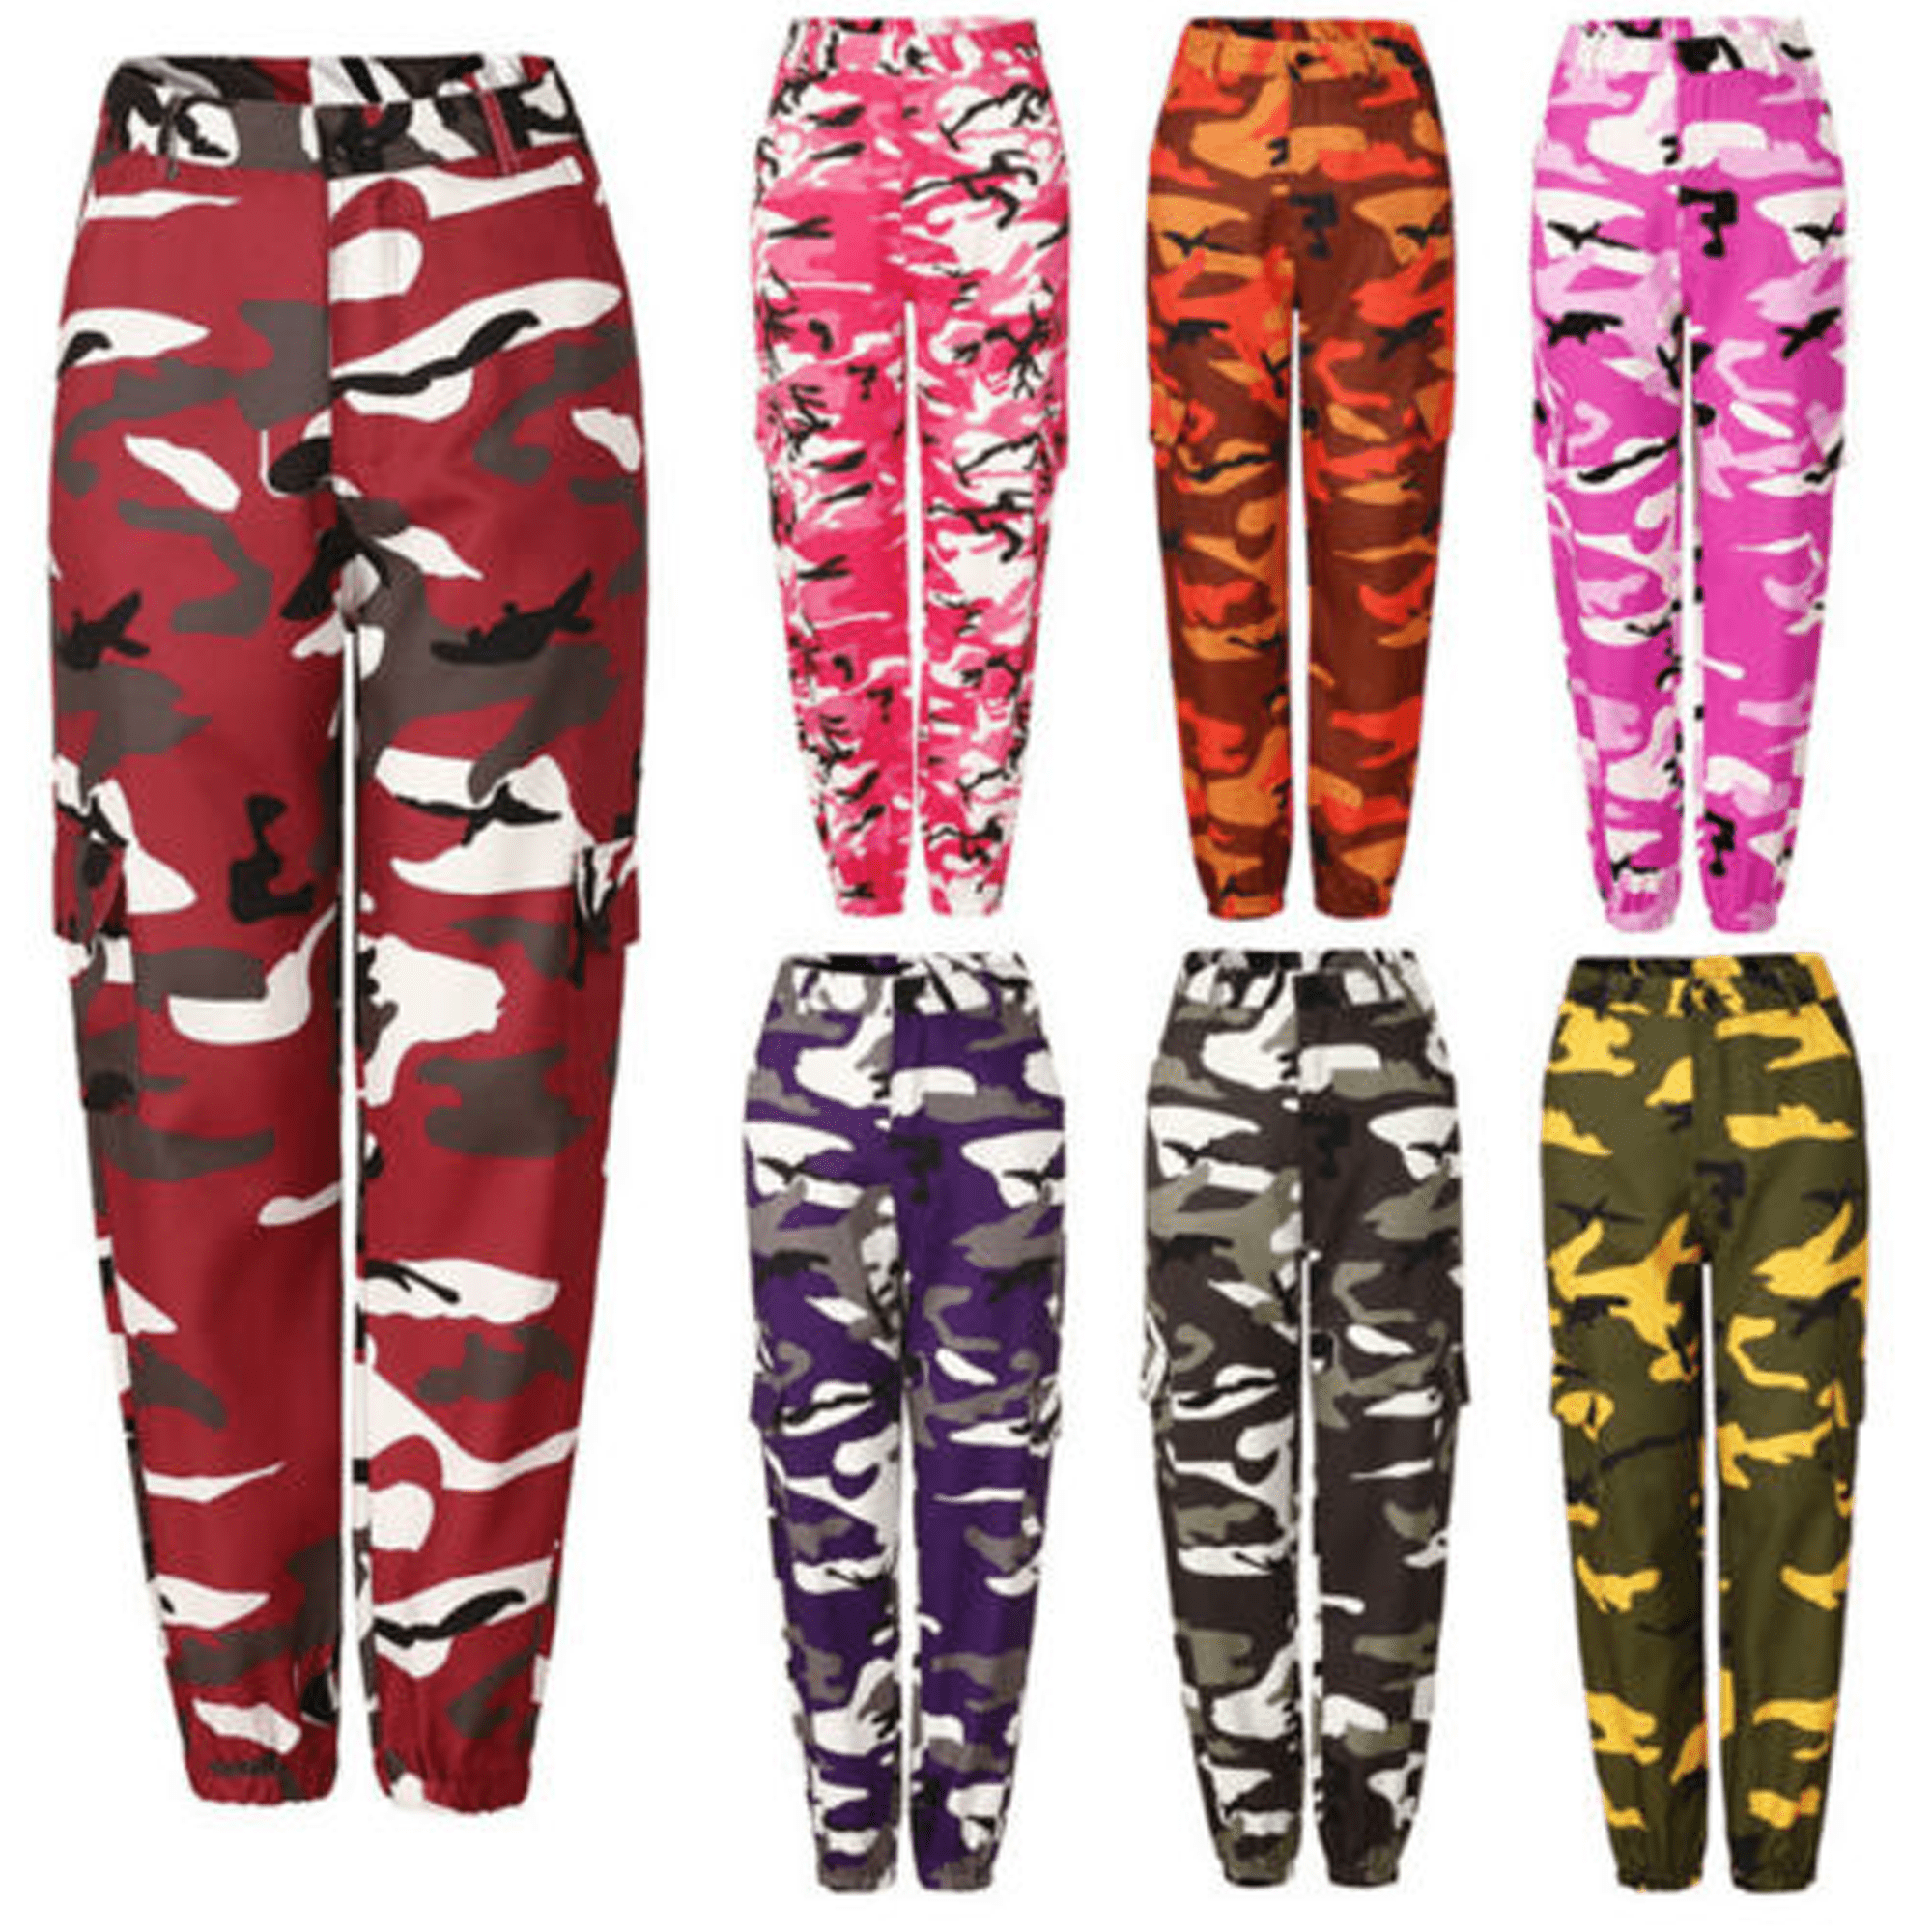 Junhouse Womens Casual Drawstring Elastic Waist Trousers Camo Trousers Jogging Jogger Pants Sports Gym Military Army Print Tracksuit Bottoms Stretchy Workout Trousers